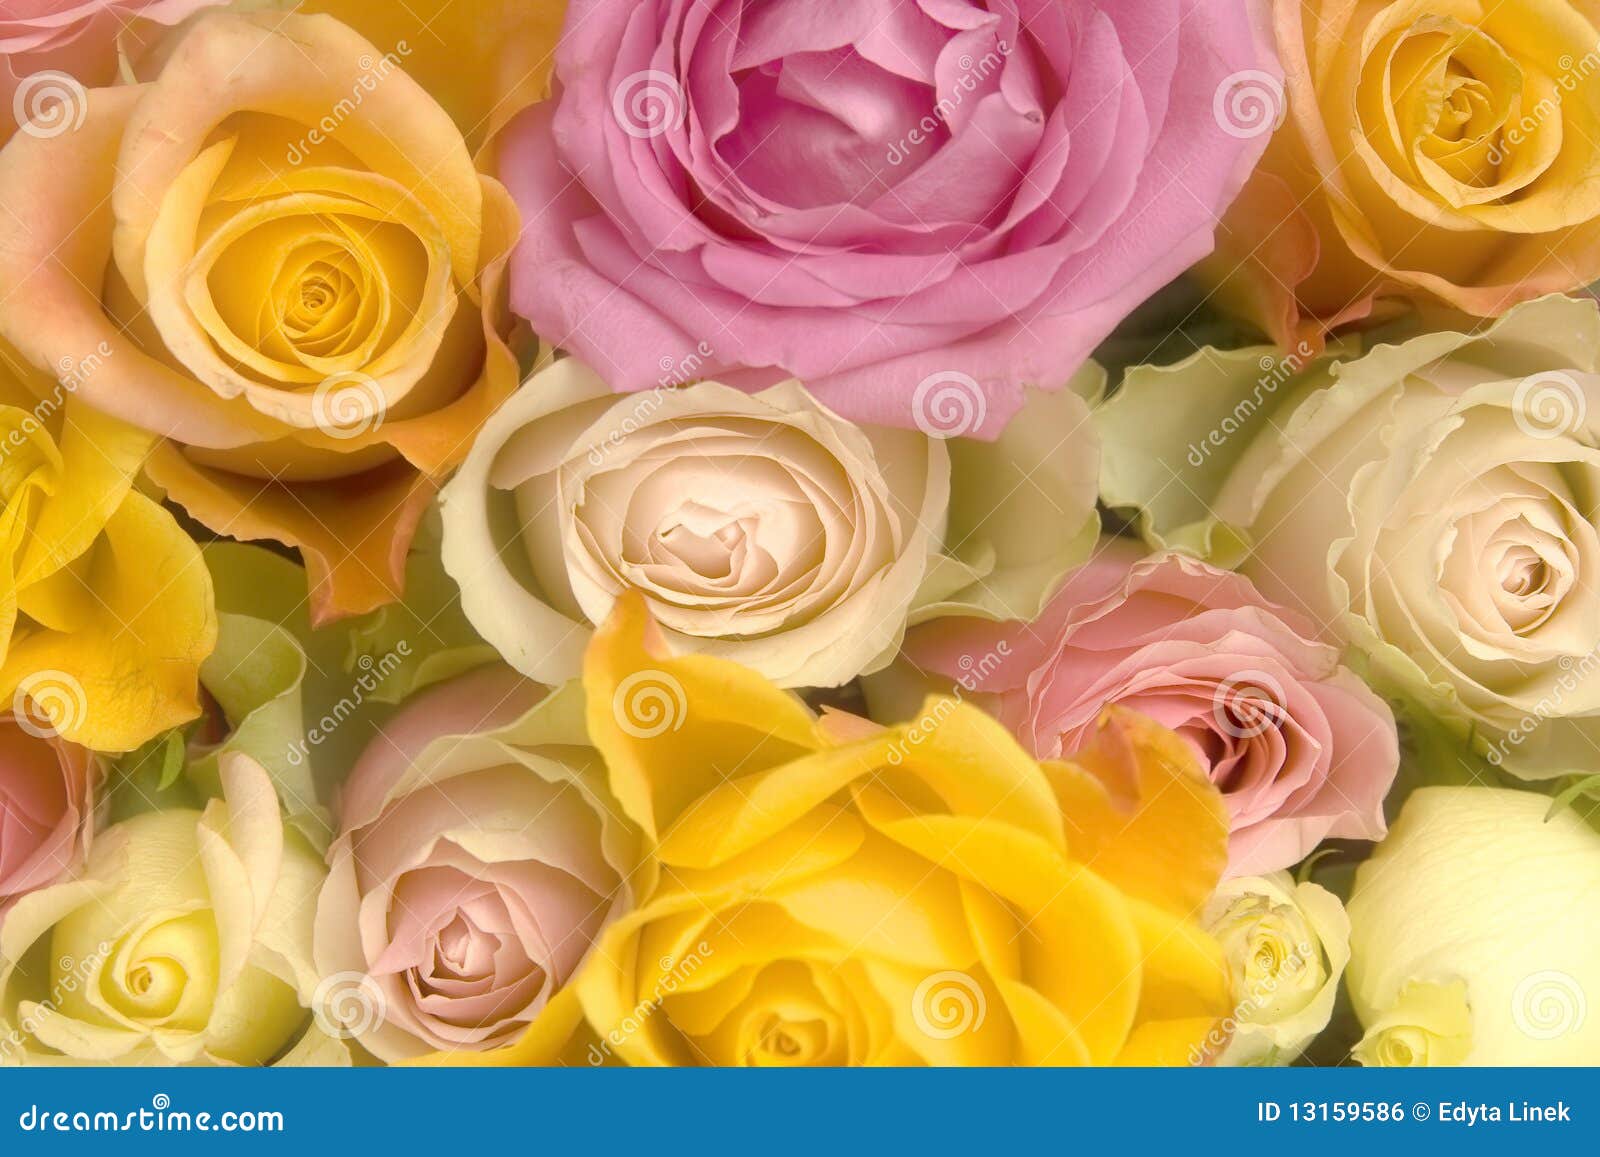 Roses On A Pale Yellow And Pink Pastel Background Stock Photo, Picture and  Royalty Free Image. Image 106641539.